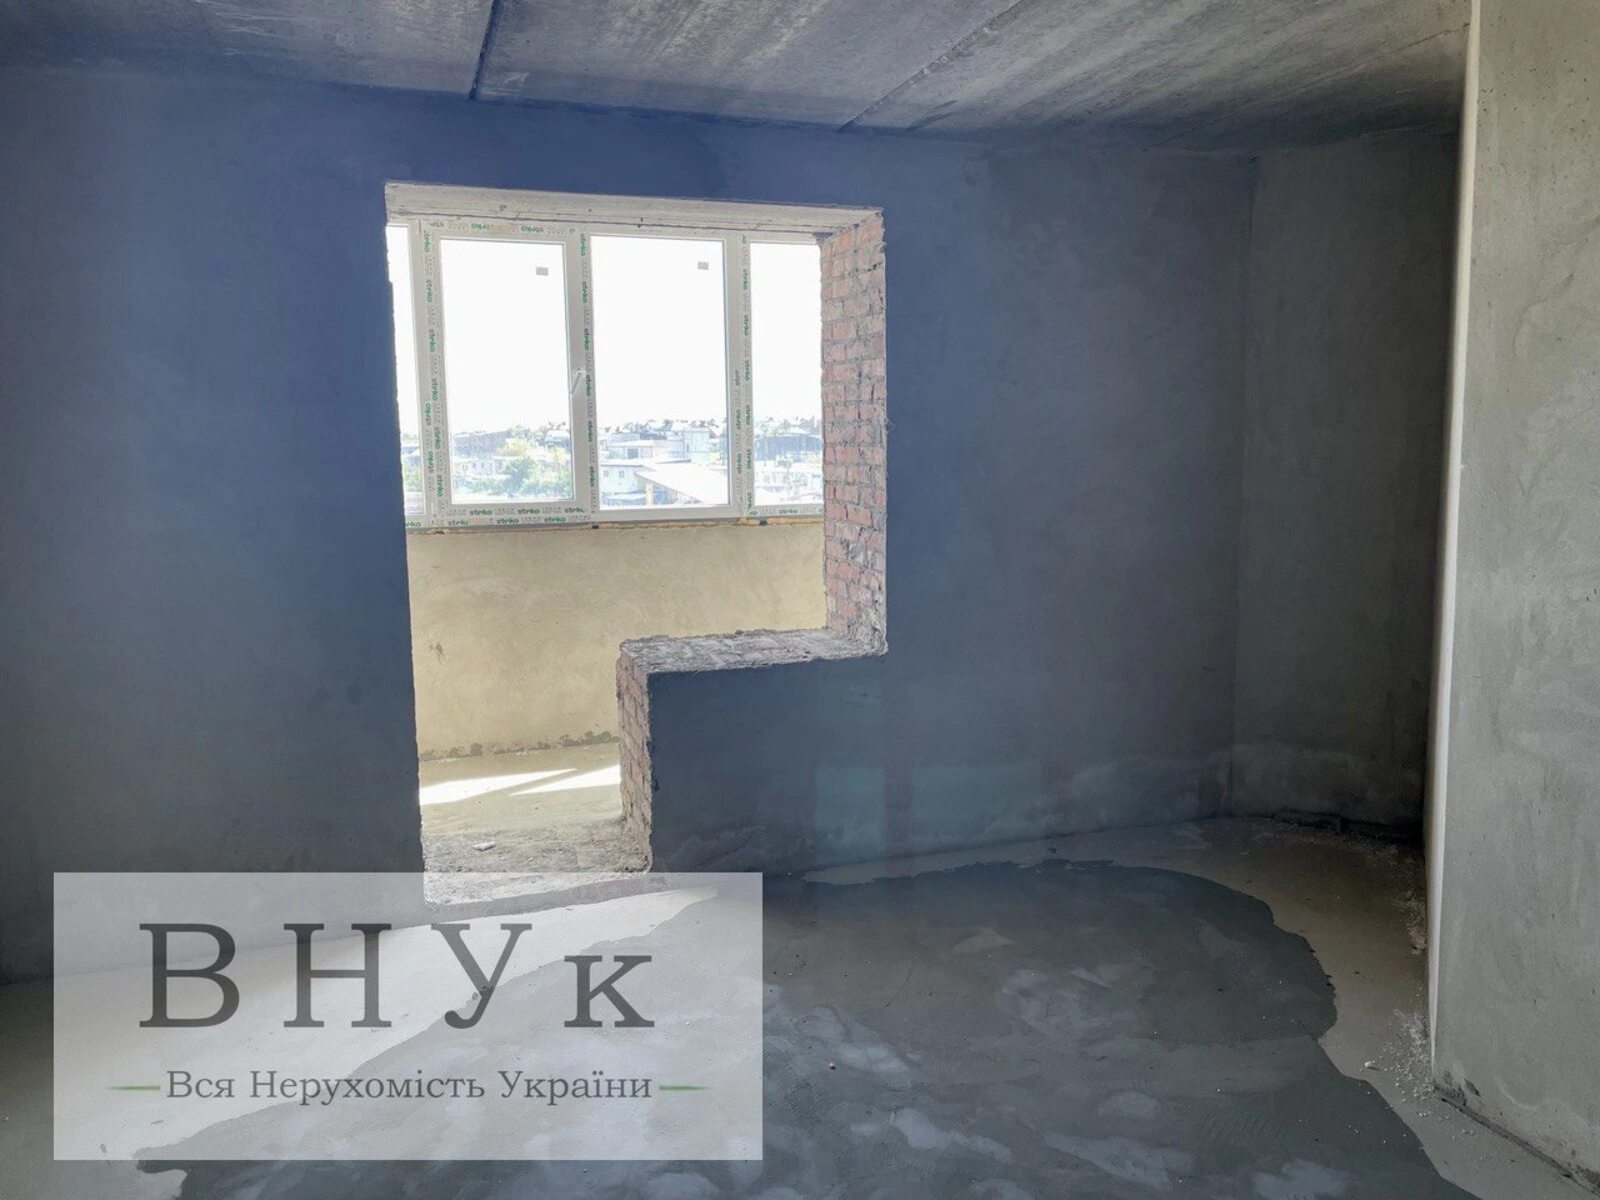 Apartments for sale. 2 rooms, 70 m², 5th floor/9 floors. Dovzhenka O. vul., Ternopil. 